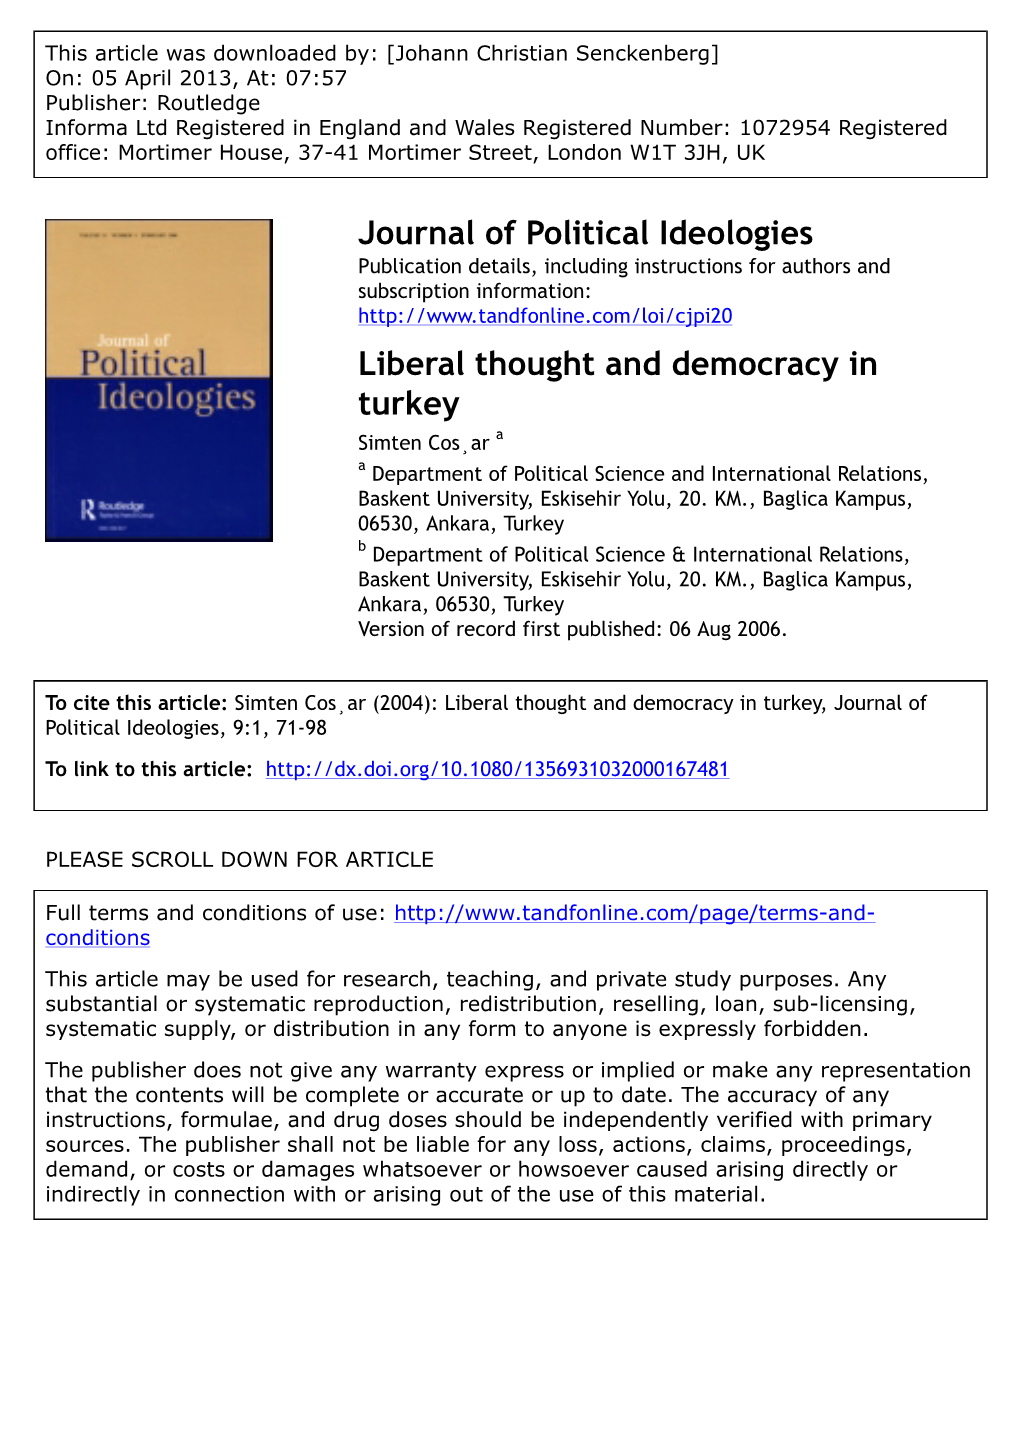 Liberal Thought and Democracy in Turkey Simten Cos¸Ar a a Department of Political Science and International Relations, Baskent University, Eskisehir Yolu, 20